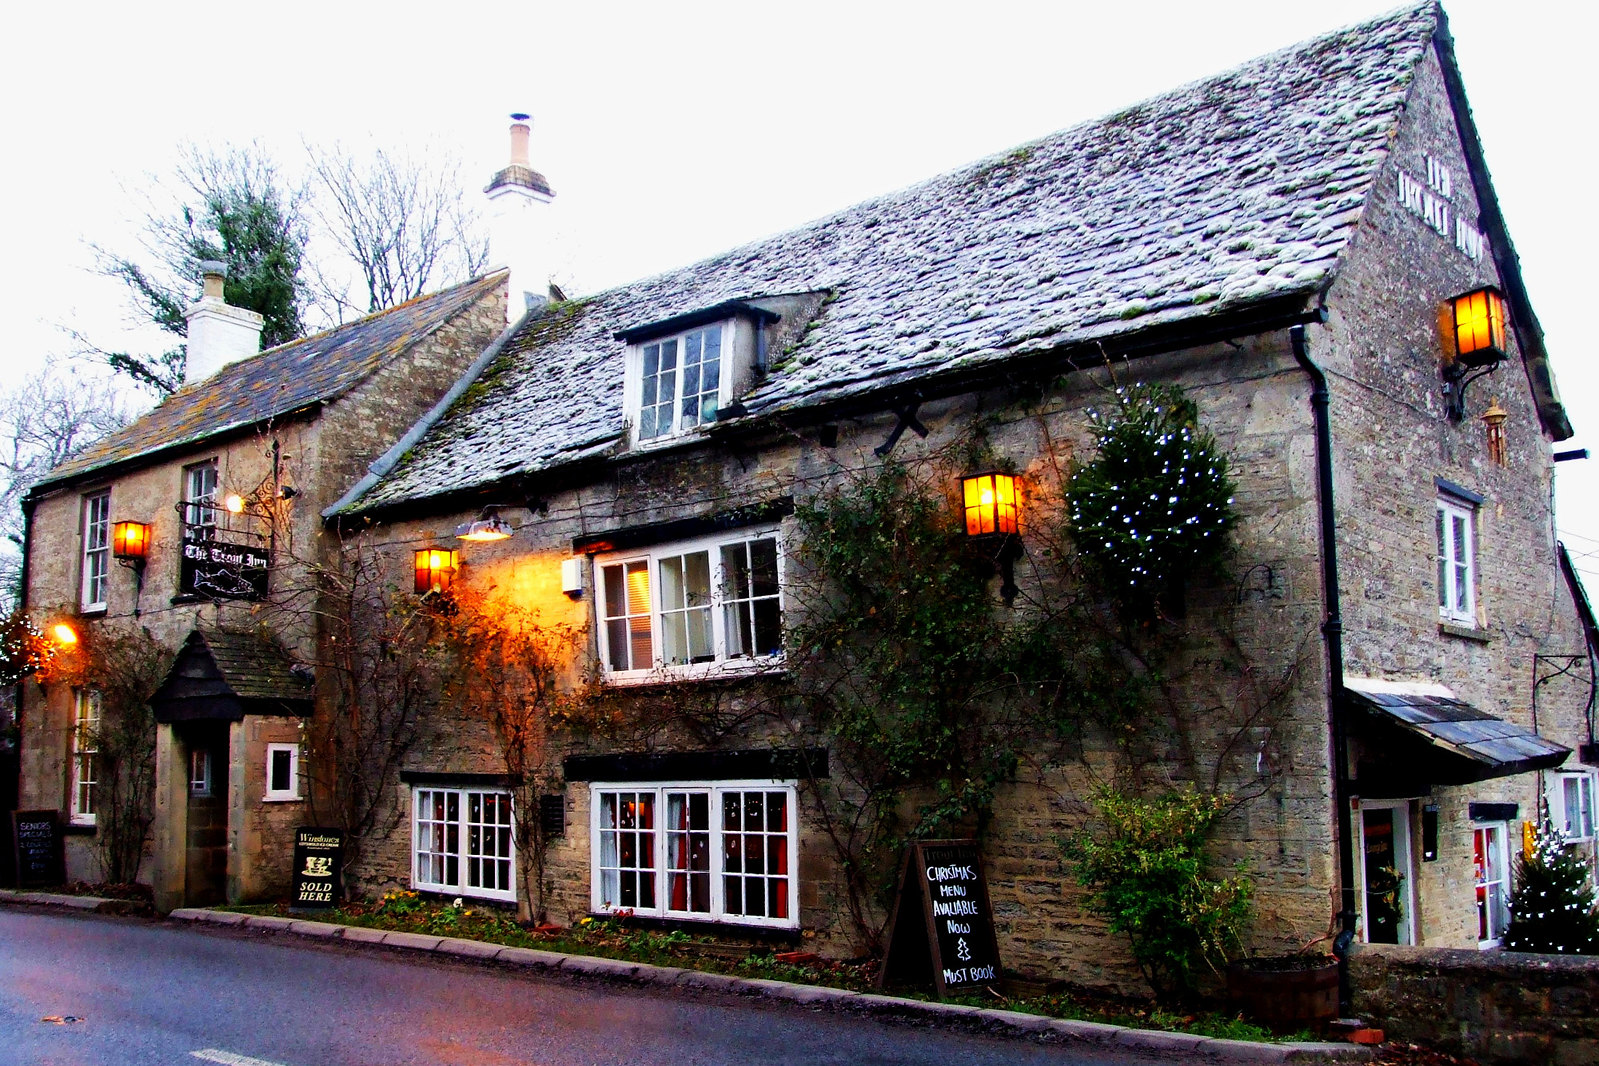 The Trout Inn on the River Thames at Lechlade, Cotswolds, England